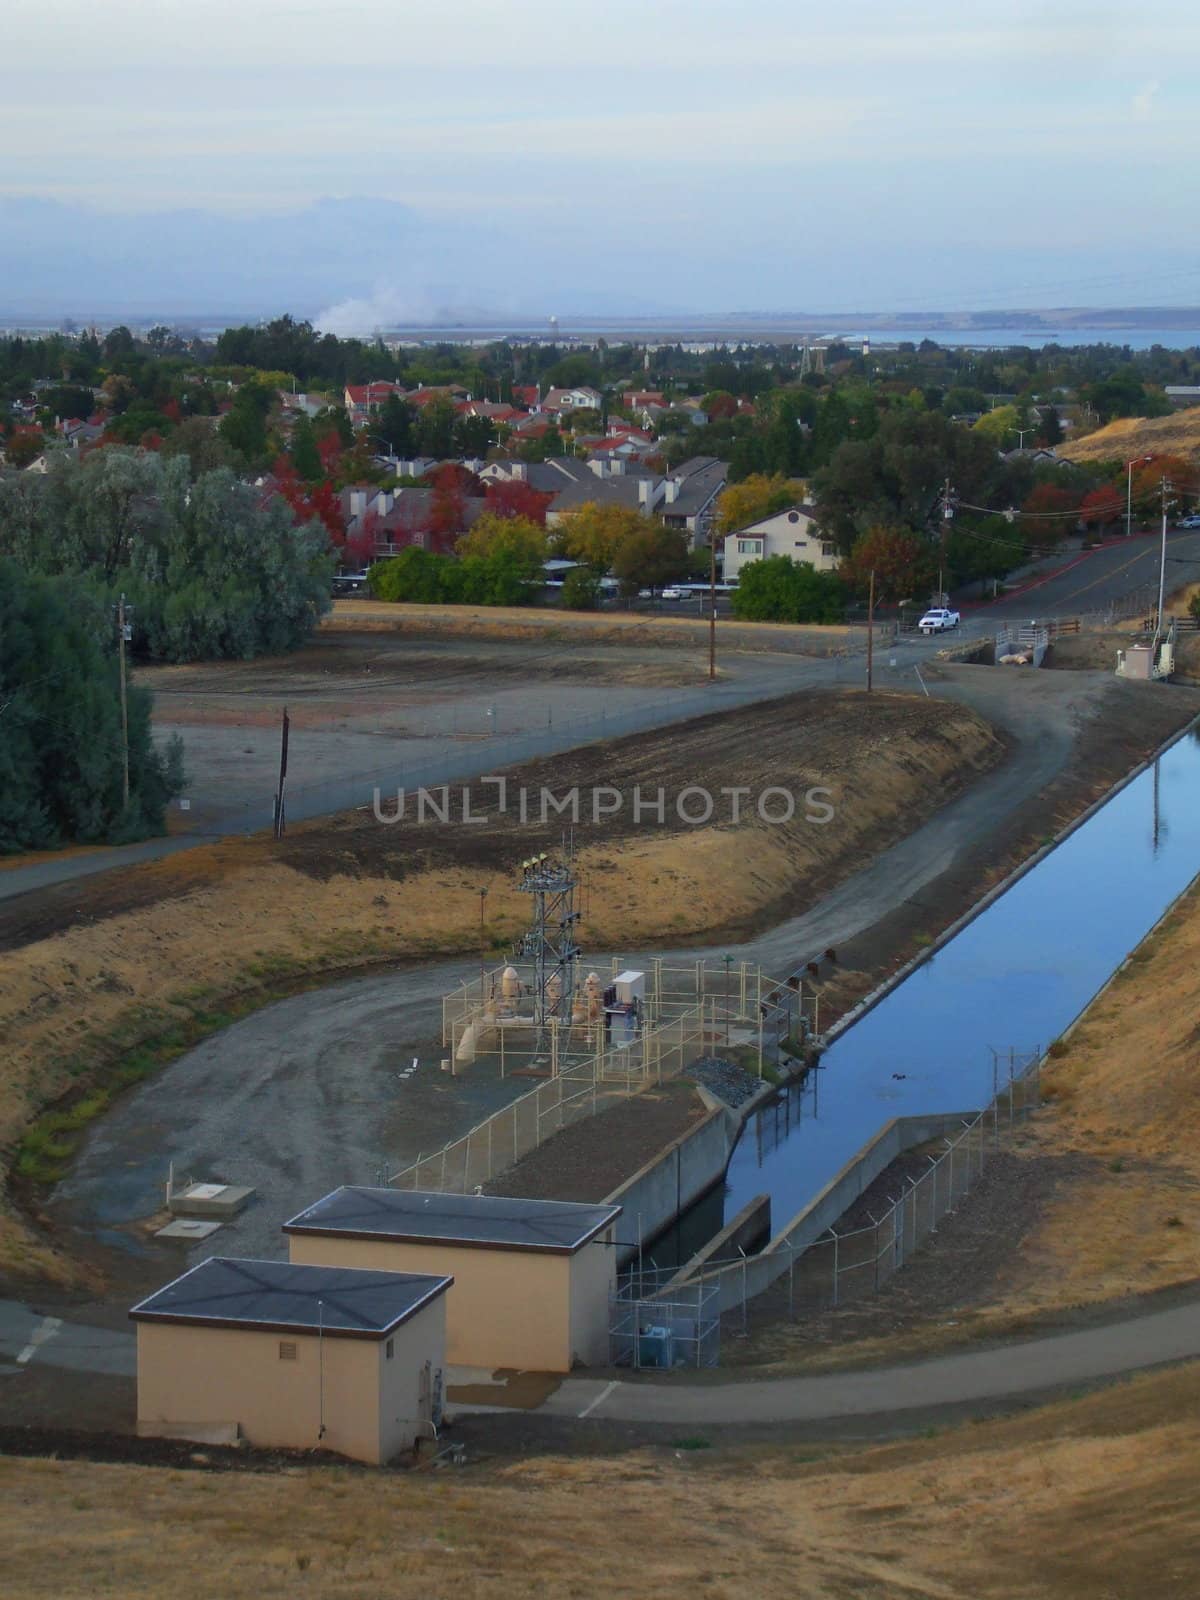 Close up of the water treatment plant.